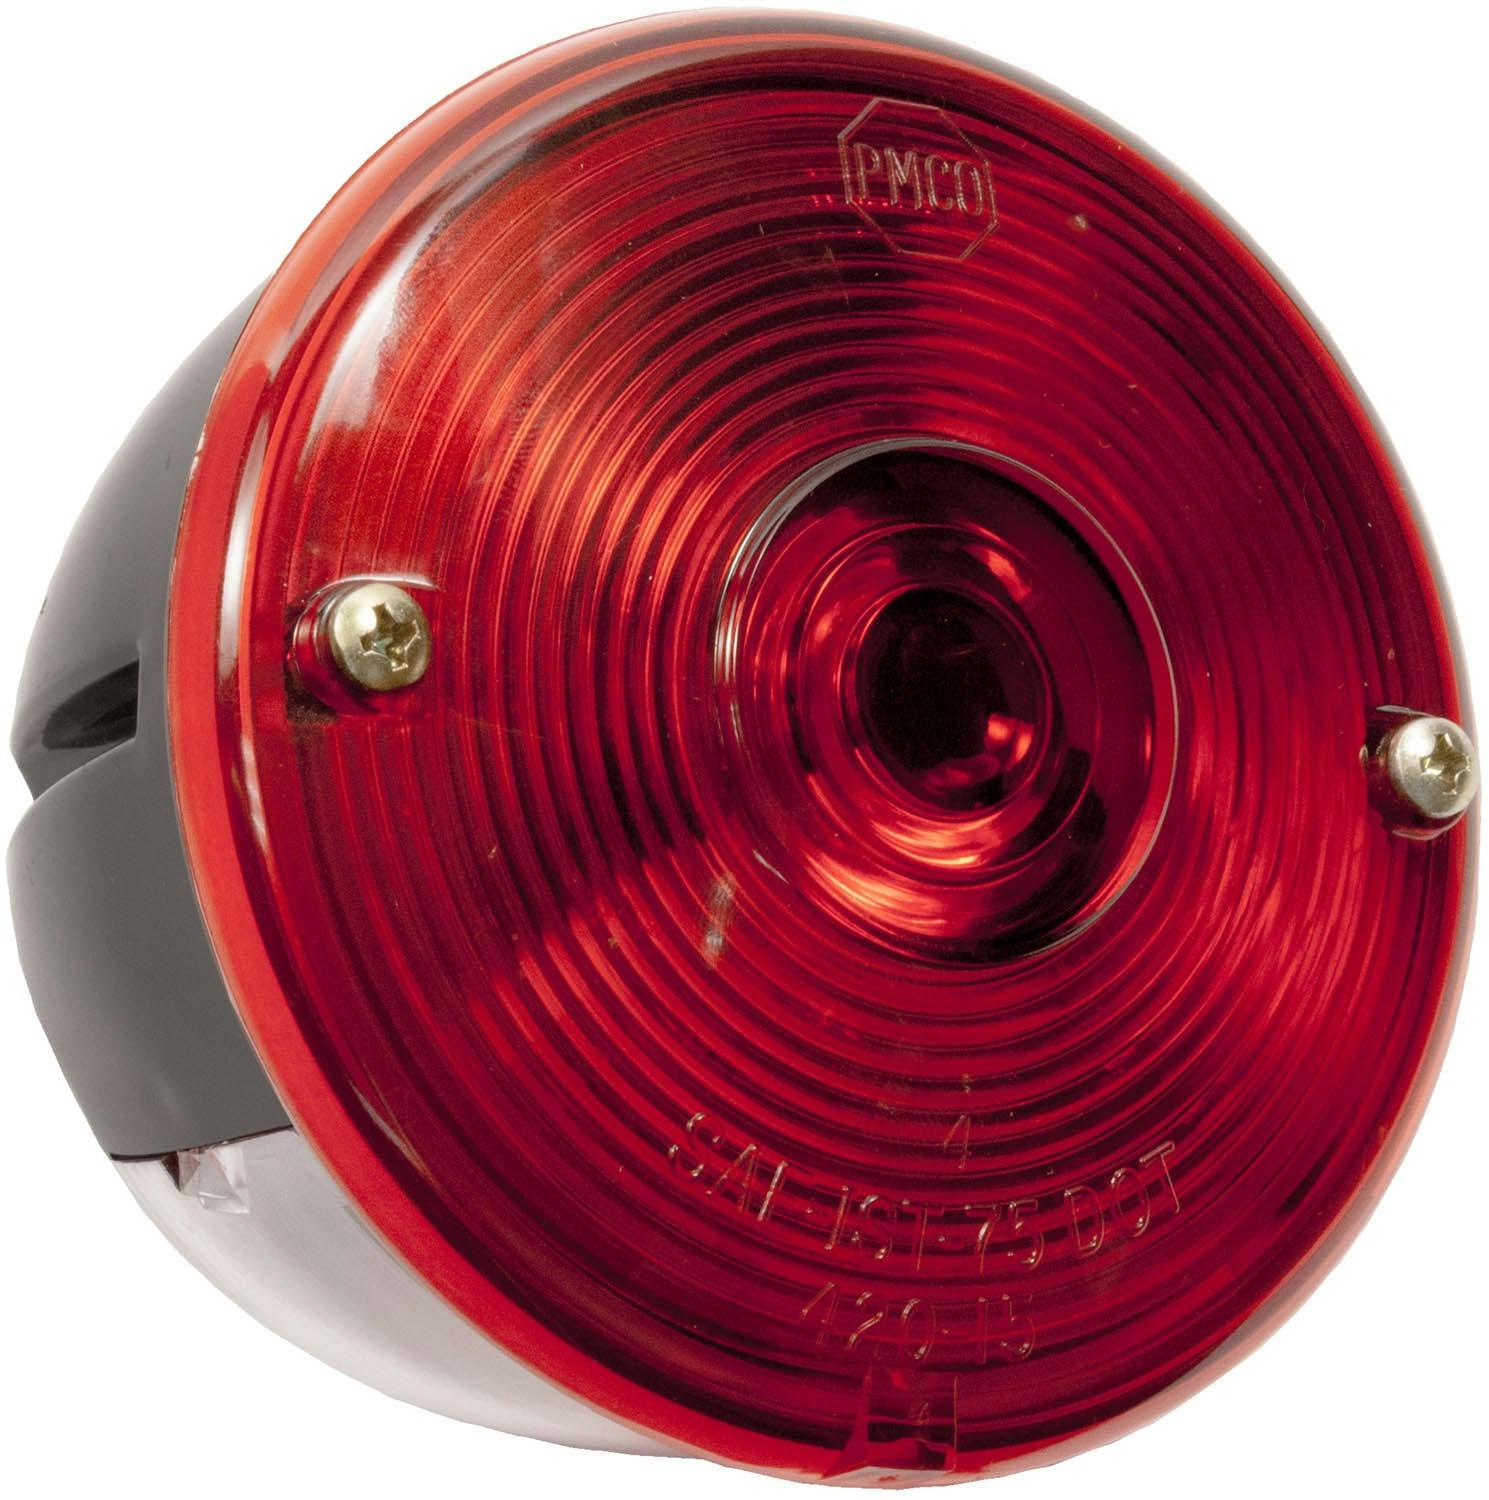 Incandescent Stop/Turn/Tail, Universal, Round, Stud-Mount, w/o-License Light, 3.75"X2.625", red (Pack of 24)